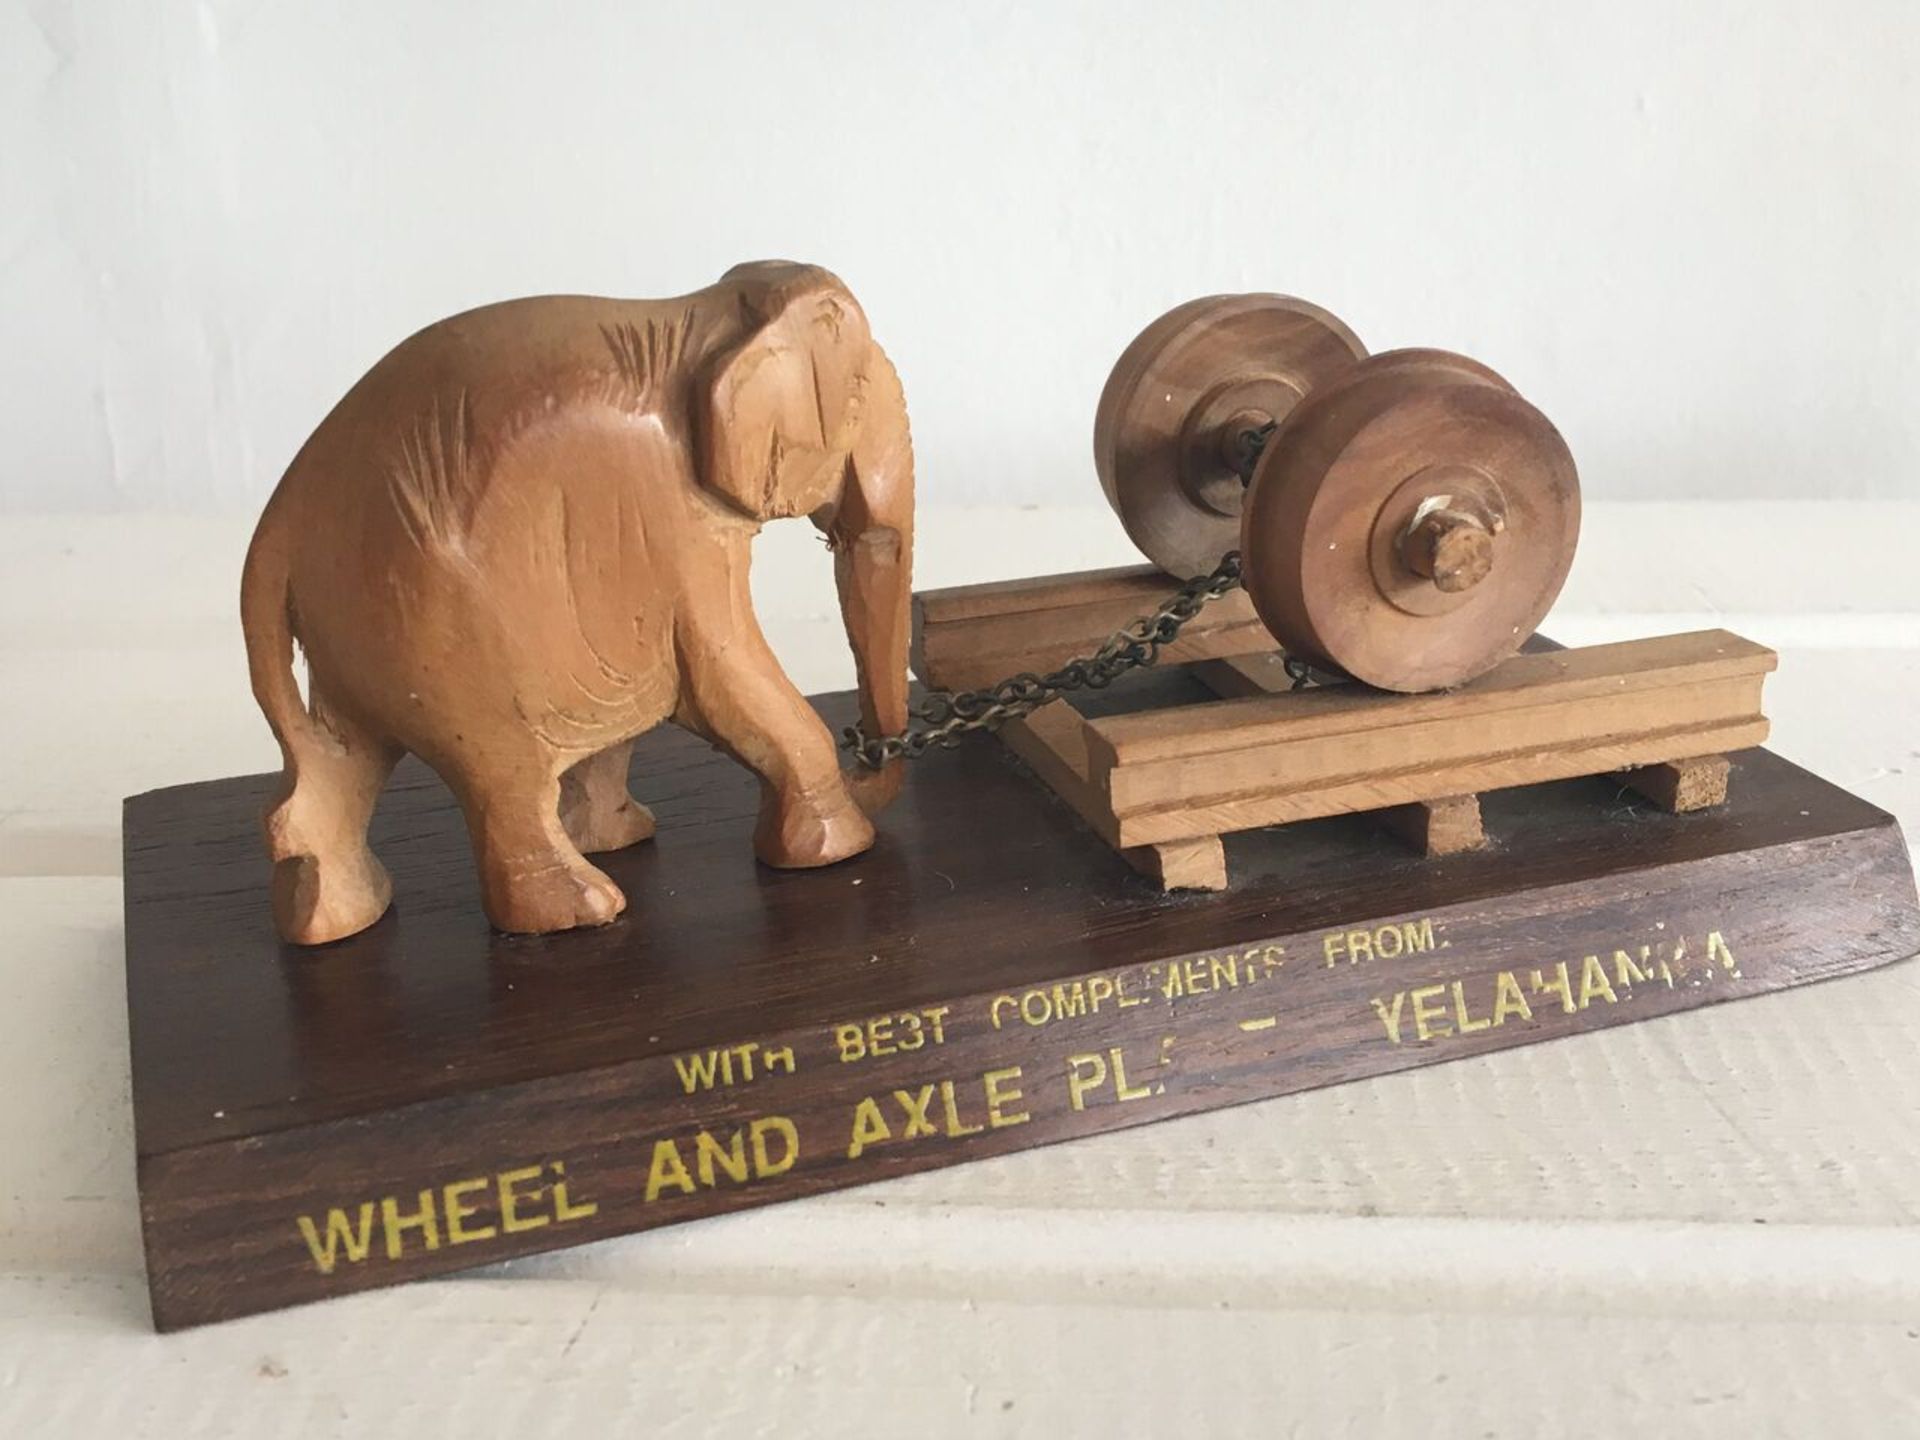 VINTAGE INDIAN TREEN CARVED WOOD ELEPHANT TROPHY - ADVERTISING - COMPLIMENTS FROM WHEEL AND AXLE - Image 3 of 3